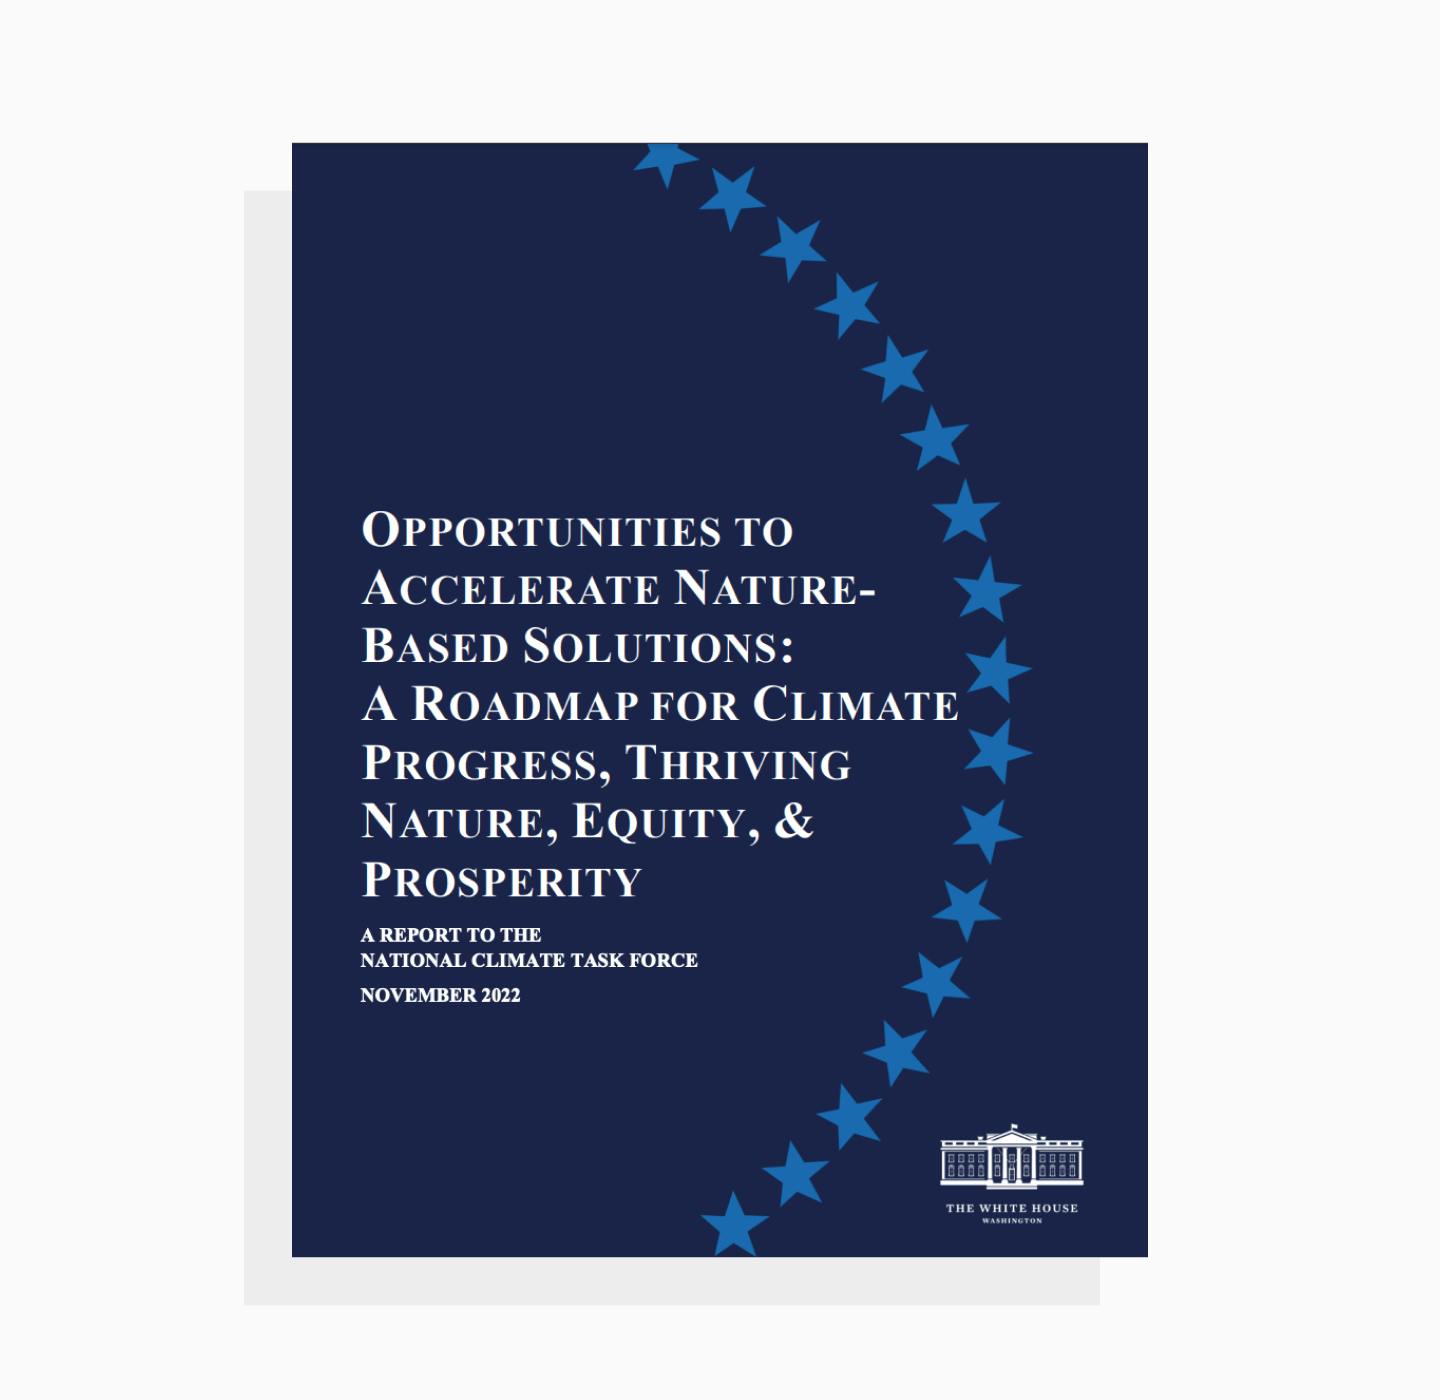 Opportunities to accelerate nature-based solutions: a roadmap for climate progress, thriving, nature, equity, and prosperity